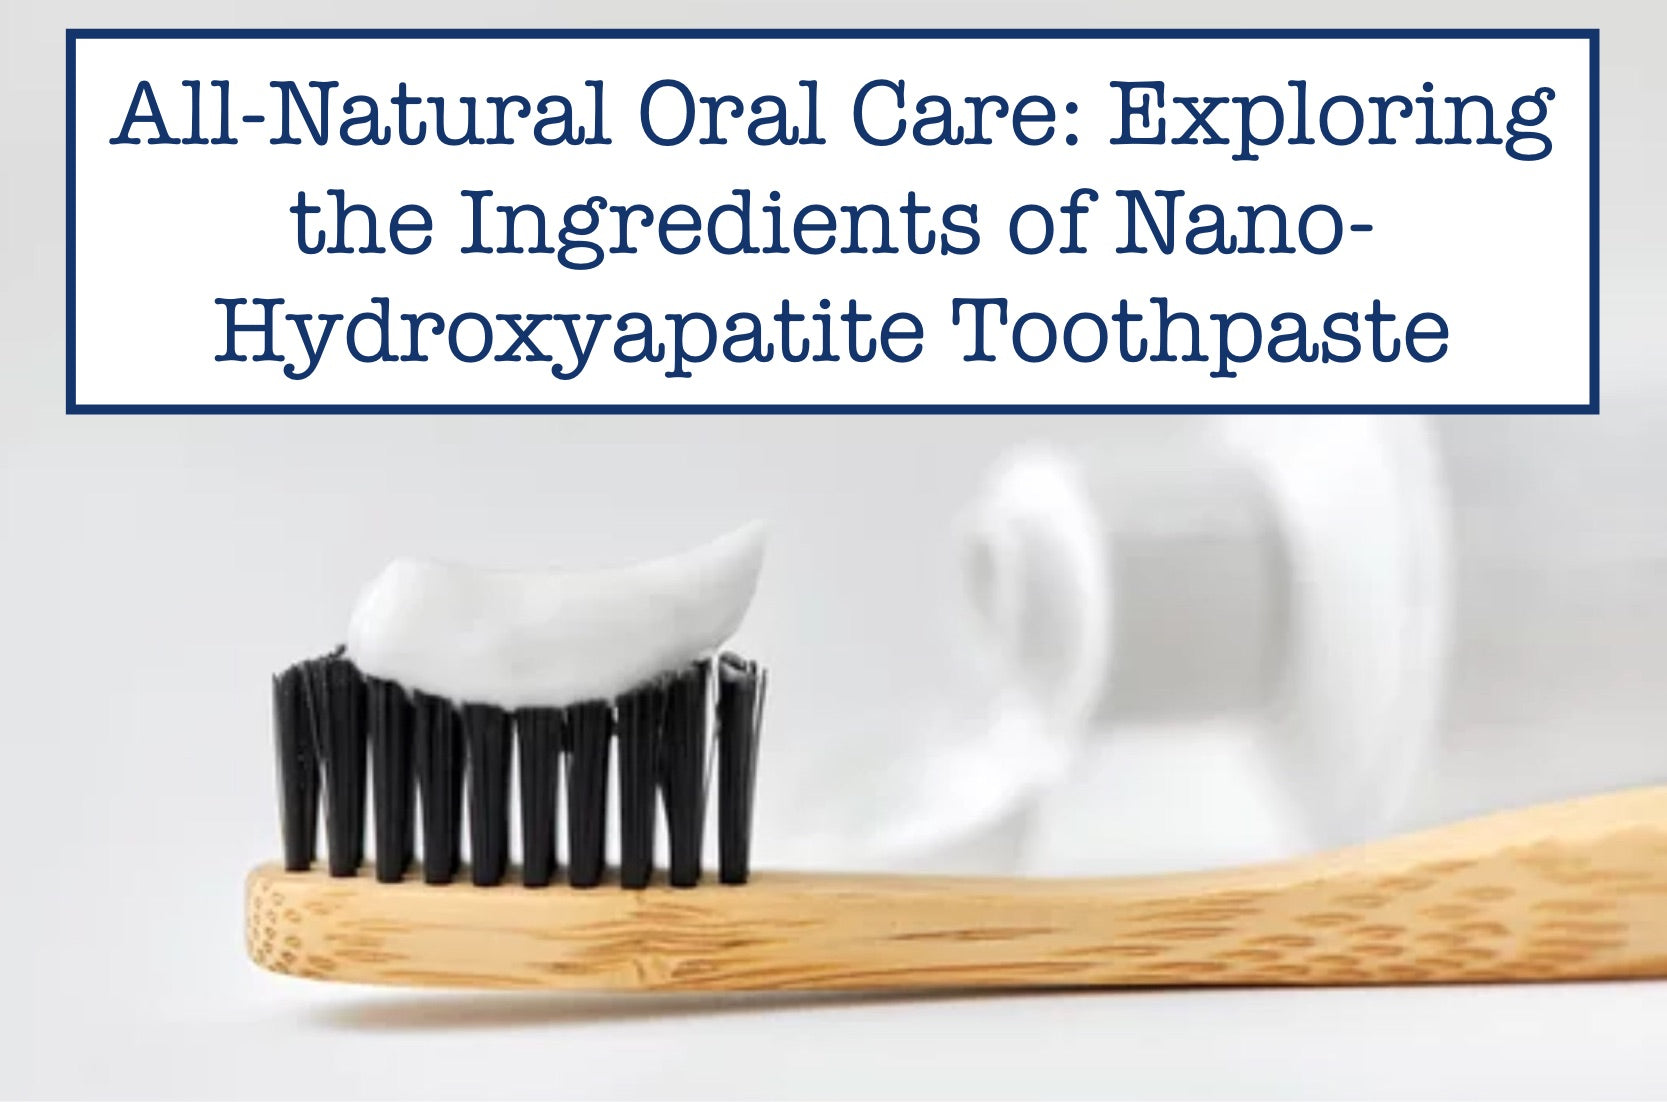 All-Natural Oral Care: Exploring the Ingredients of Nano-Hydroxyapatite Toothpaste